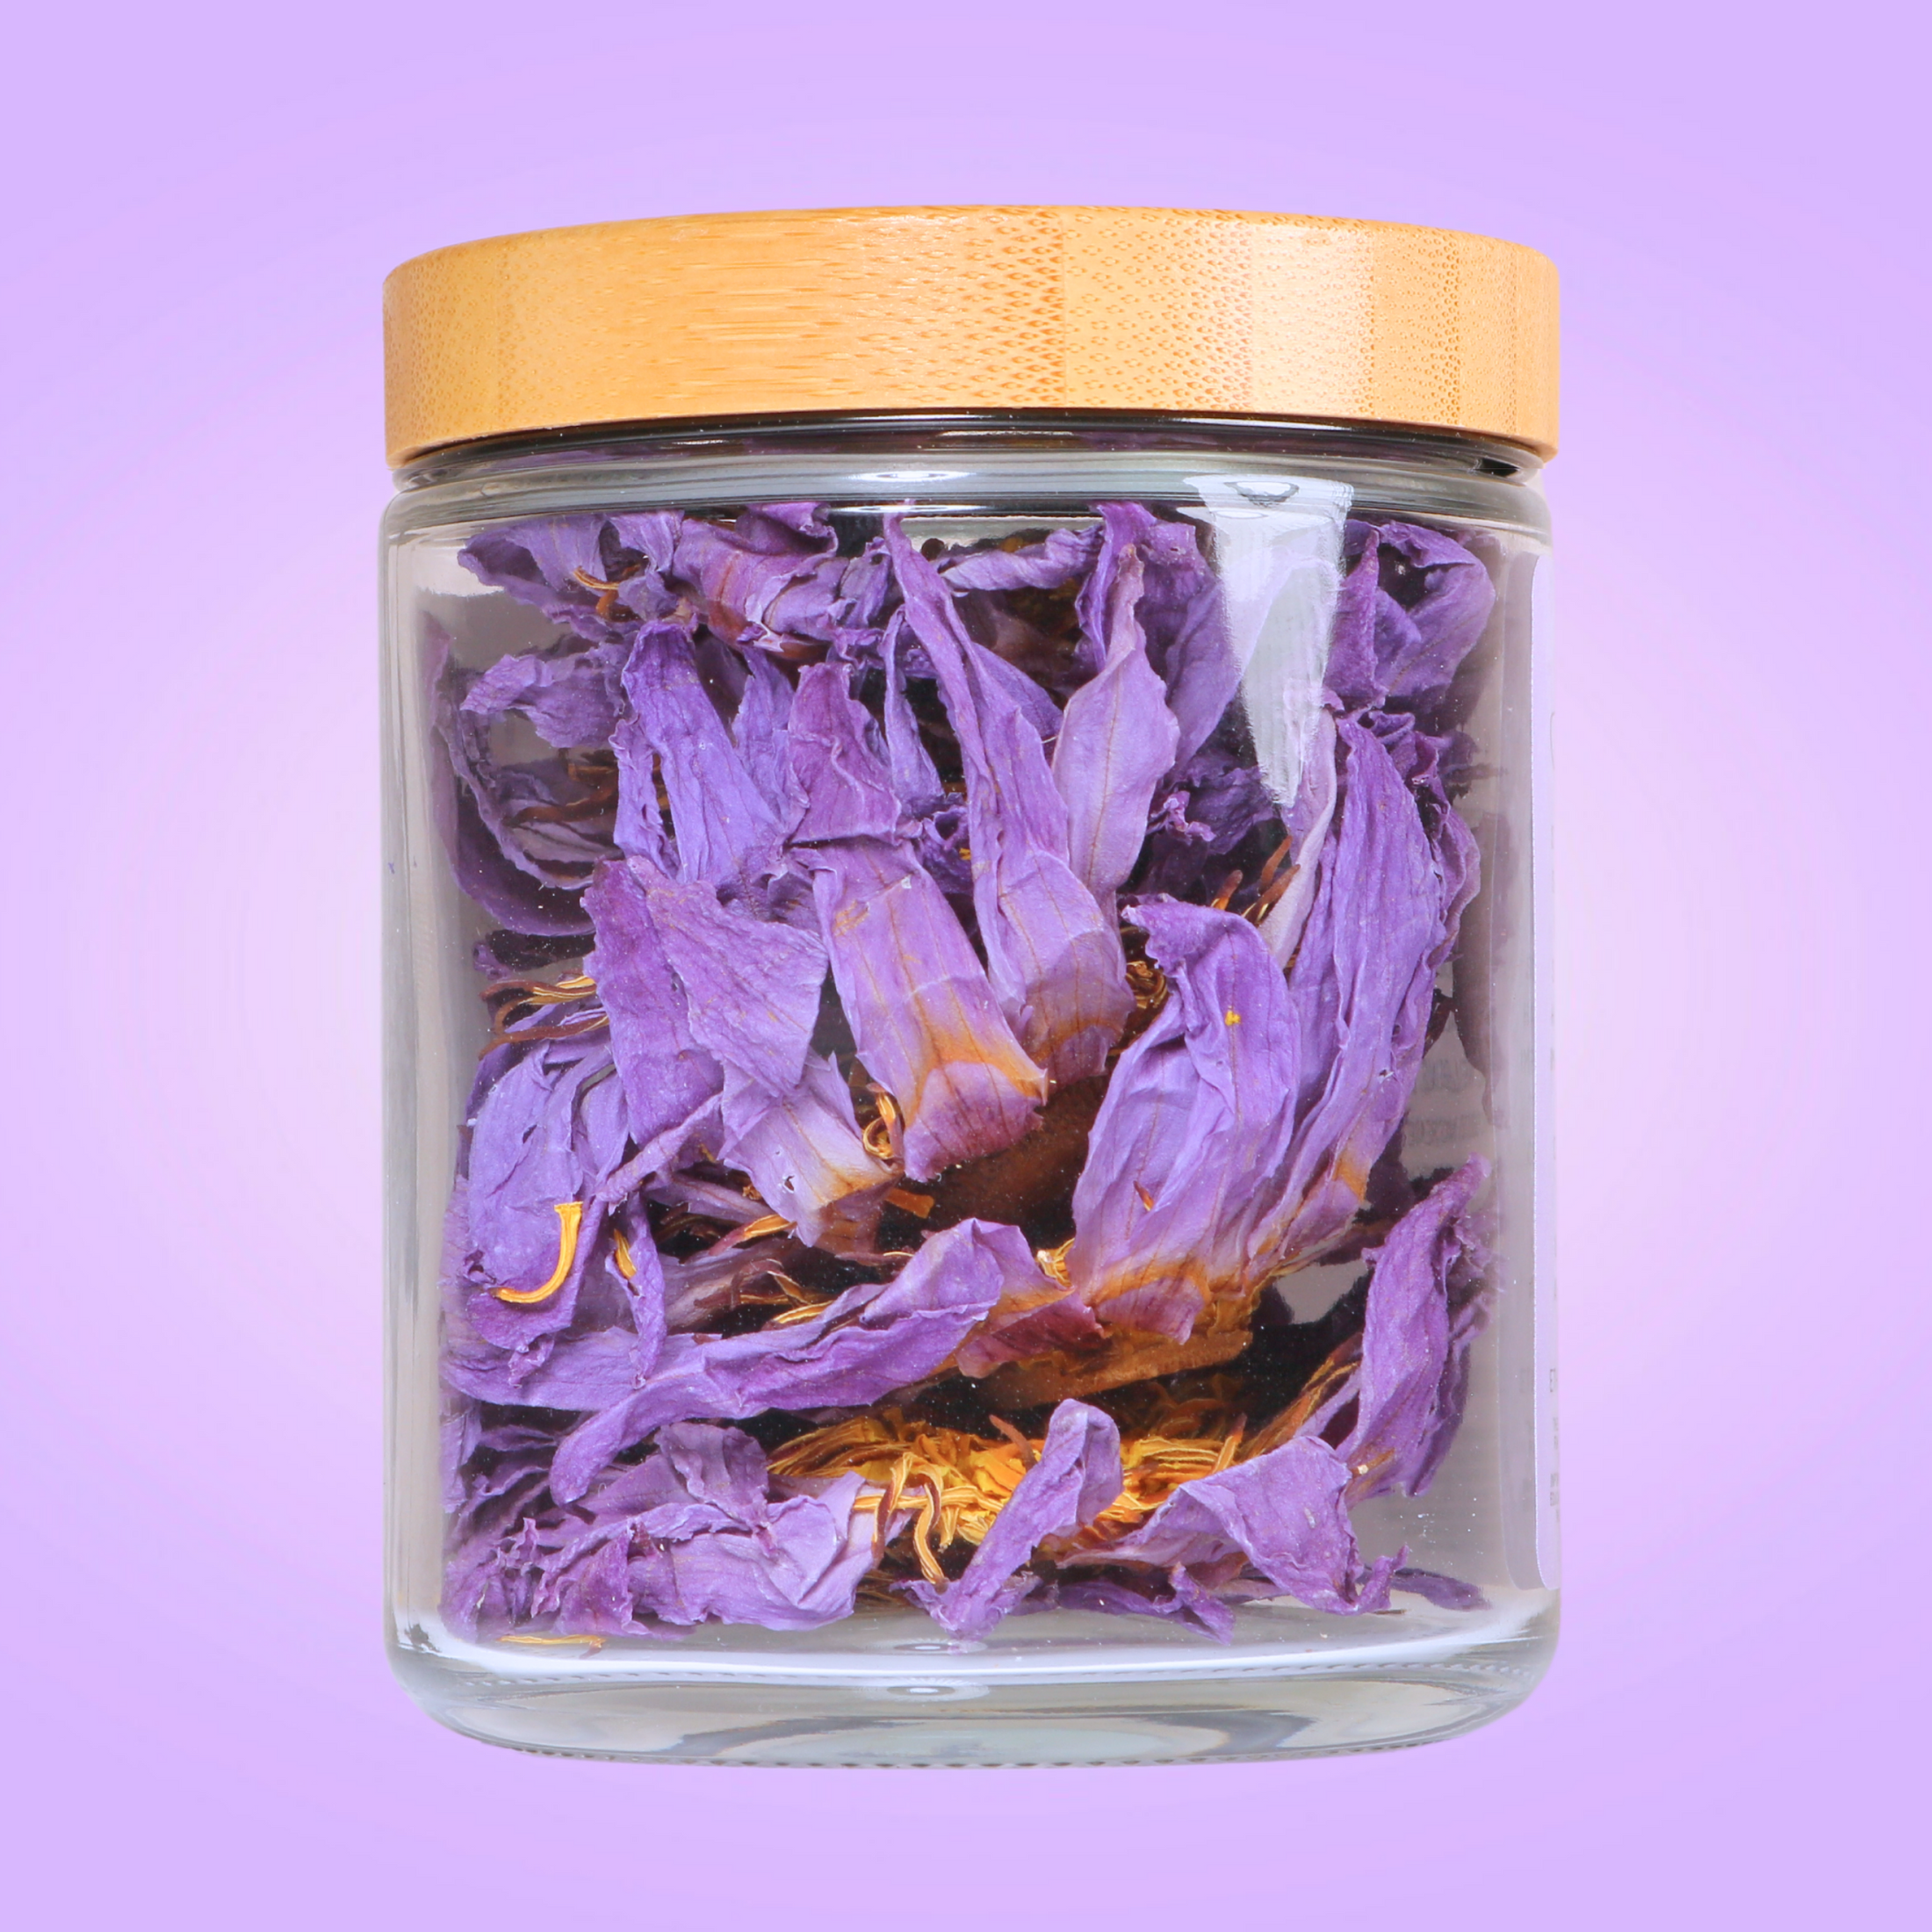 Egyptian Blue Lotus Whole Flowers in Glass Jar